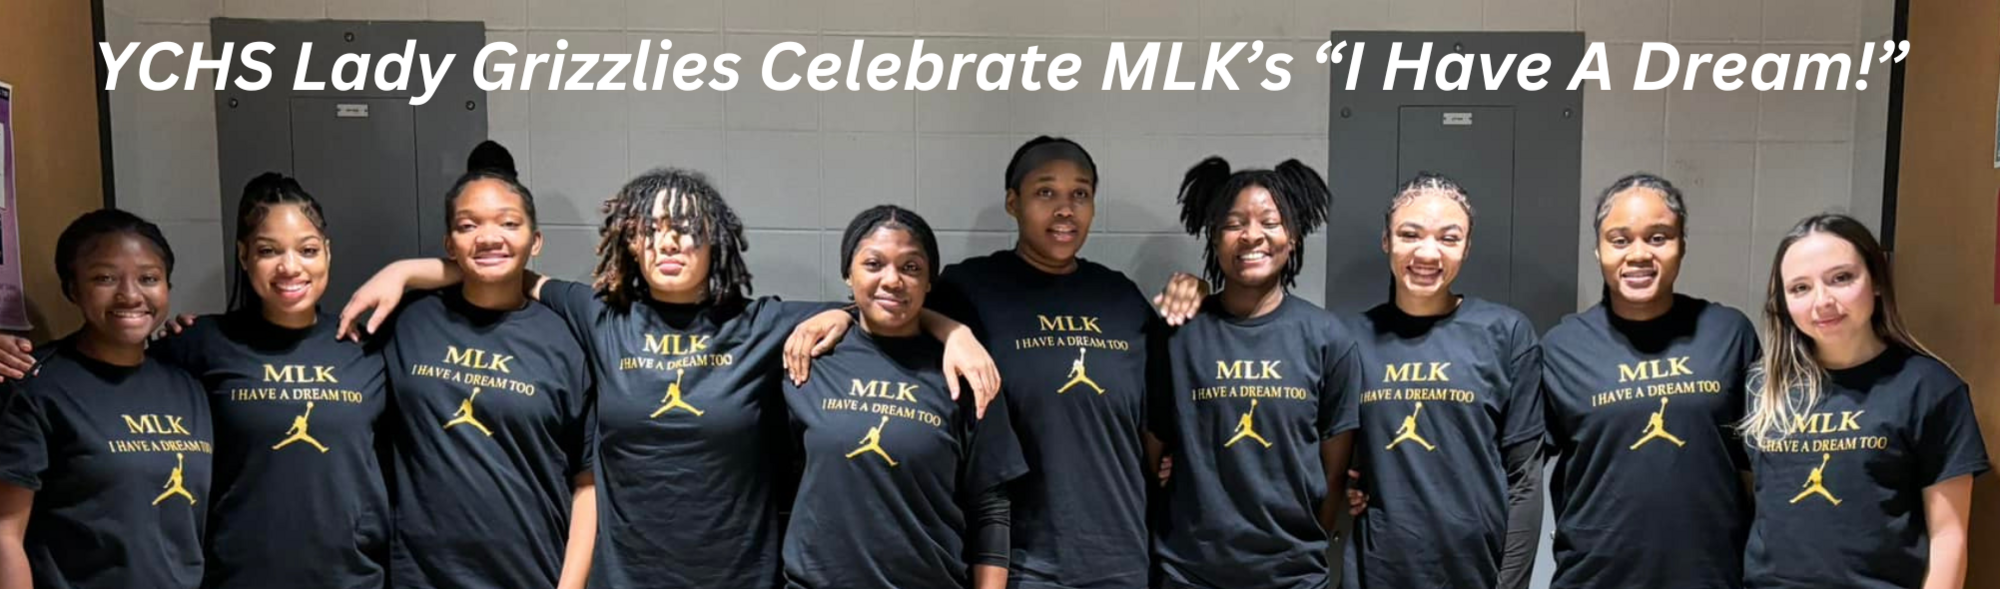 YCHS Lady Grizzlies Celebrate MLK's 'I Have A Dream!"